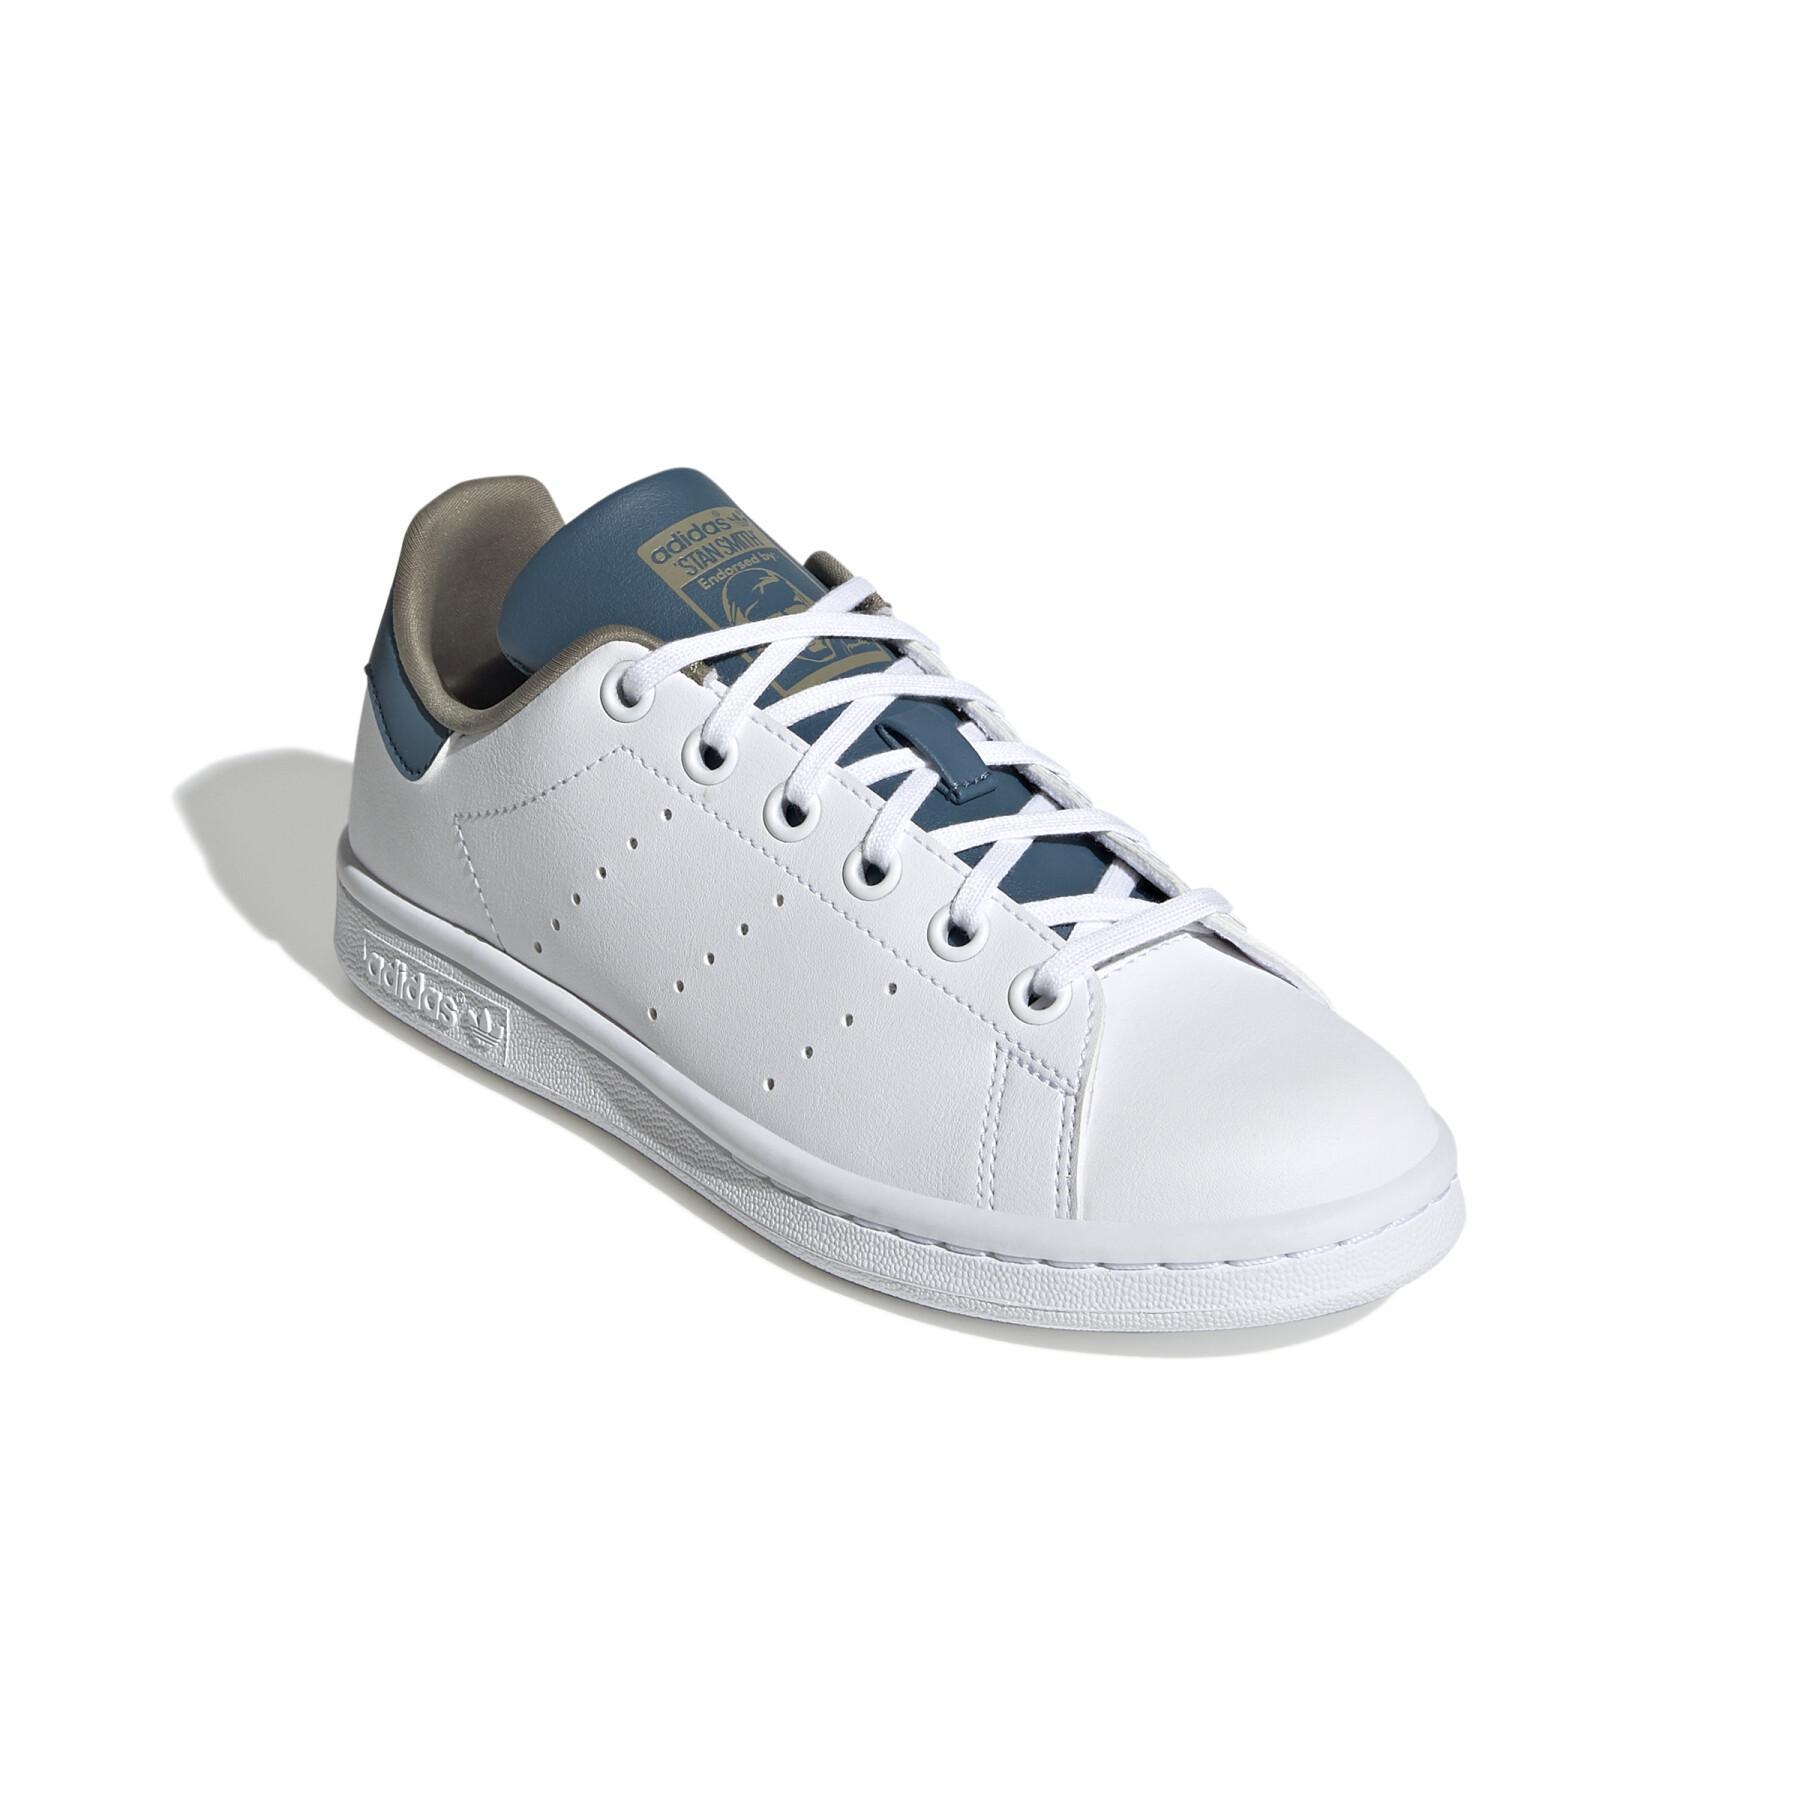 Children's shoes Adidas Stan Smith